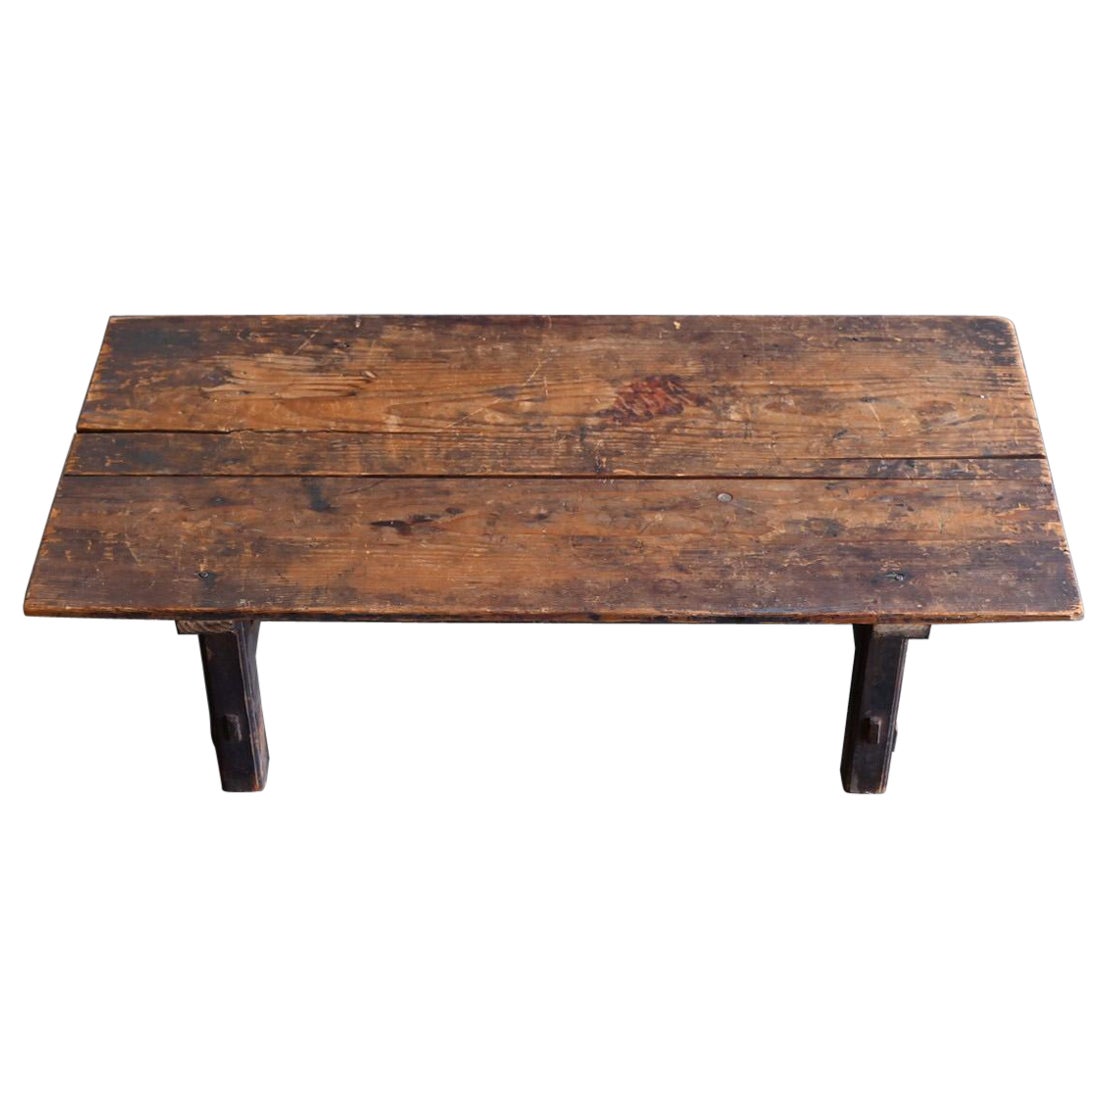 Japanese antique small wooden low table/1868-1920/Simple table